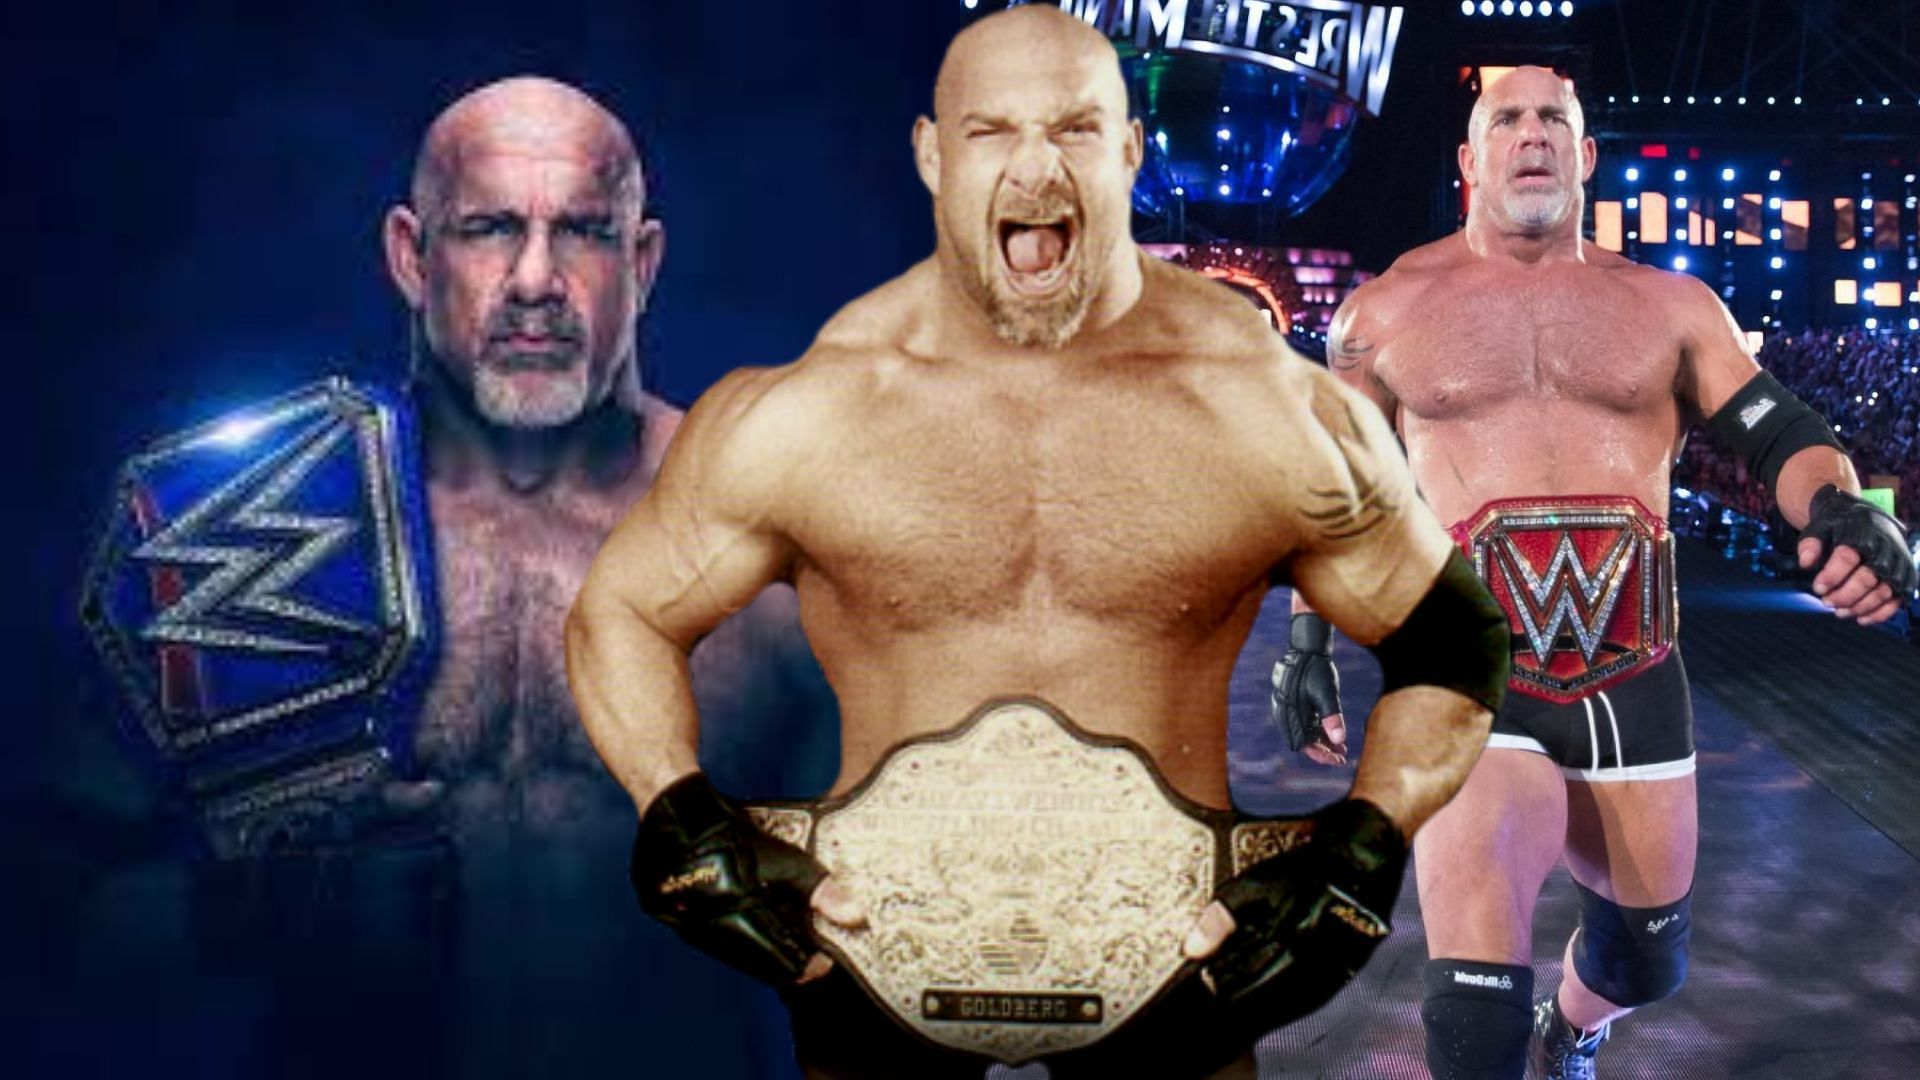 Bill Goldberg held the Big Gold Belt in his first run and the Universal Championship in his second